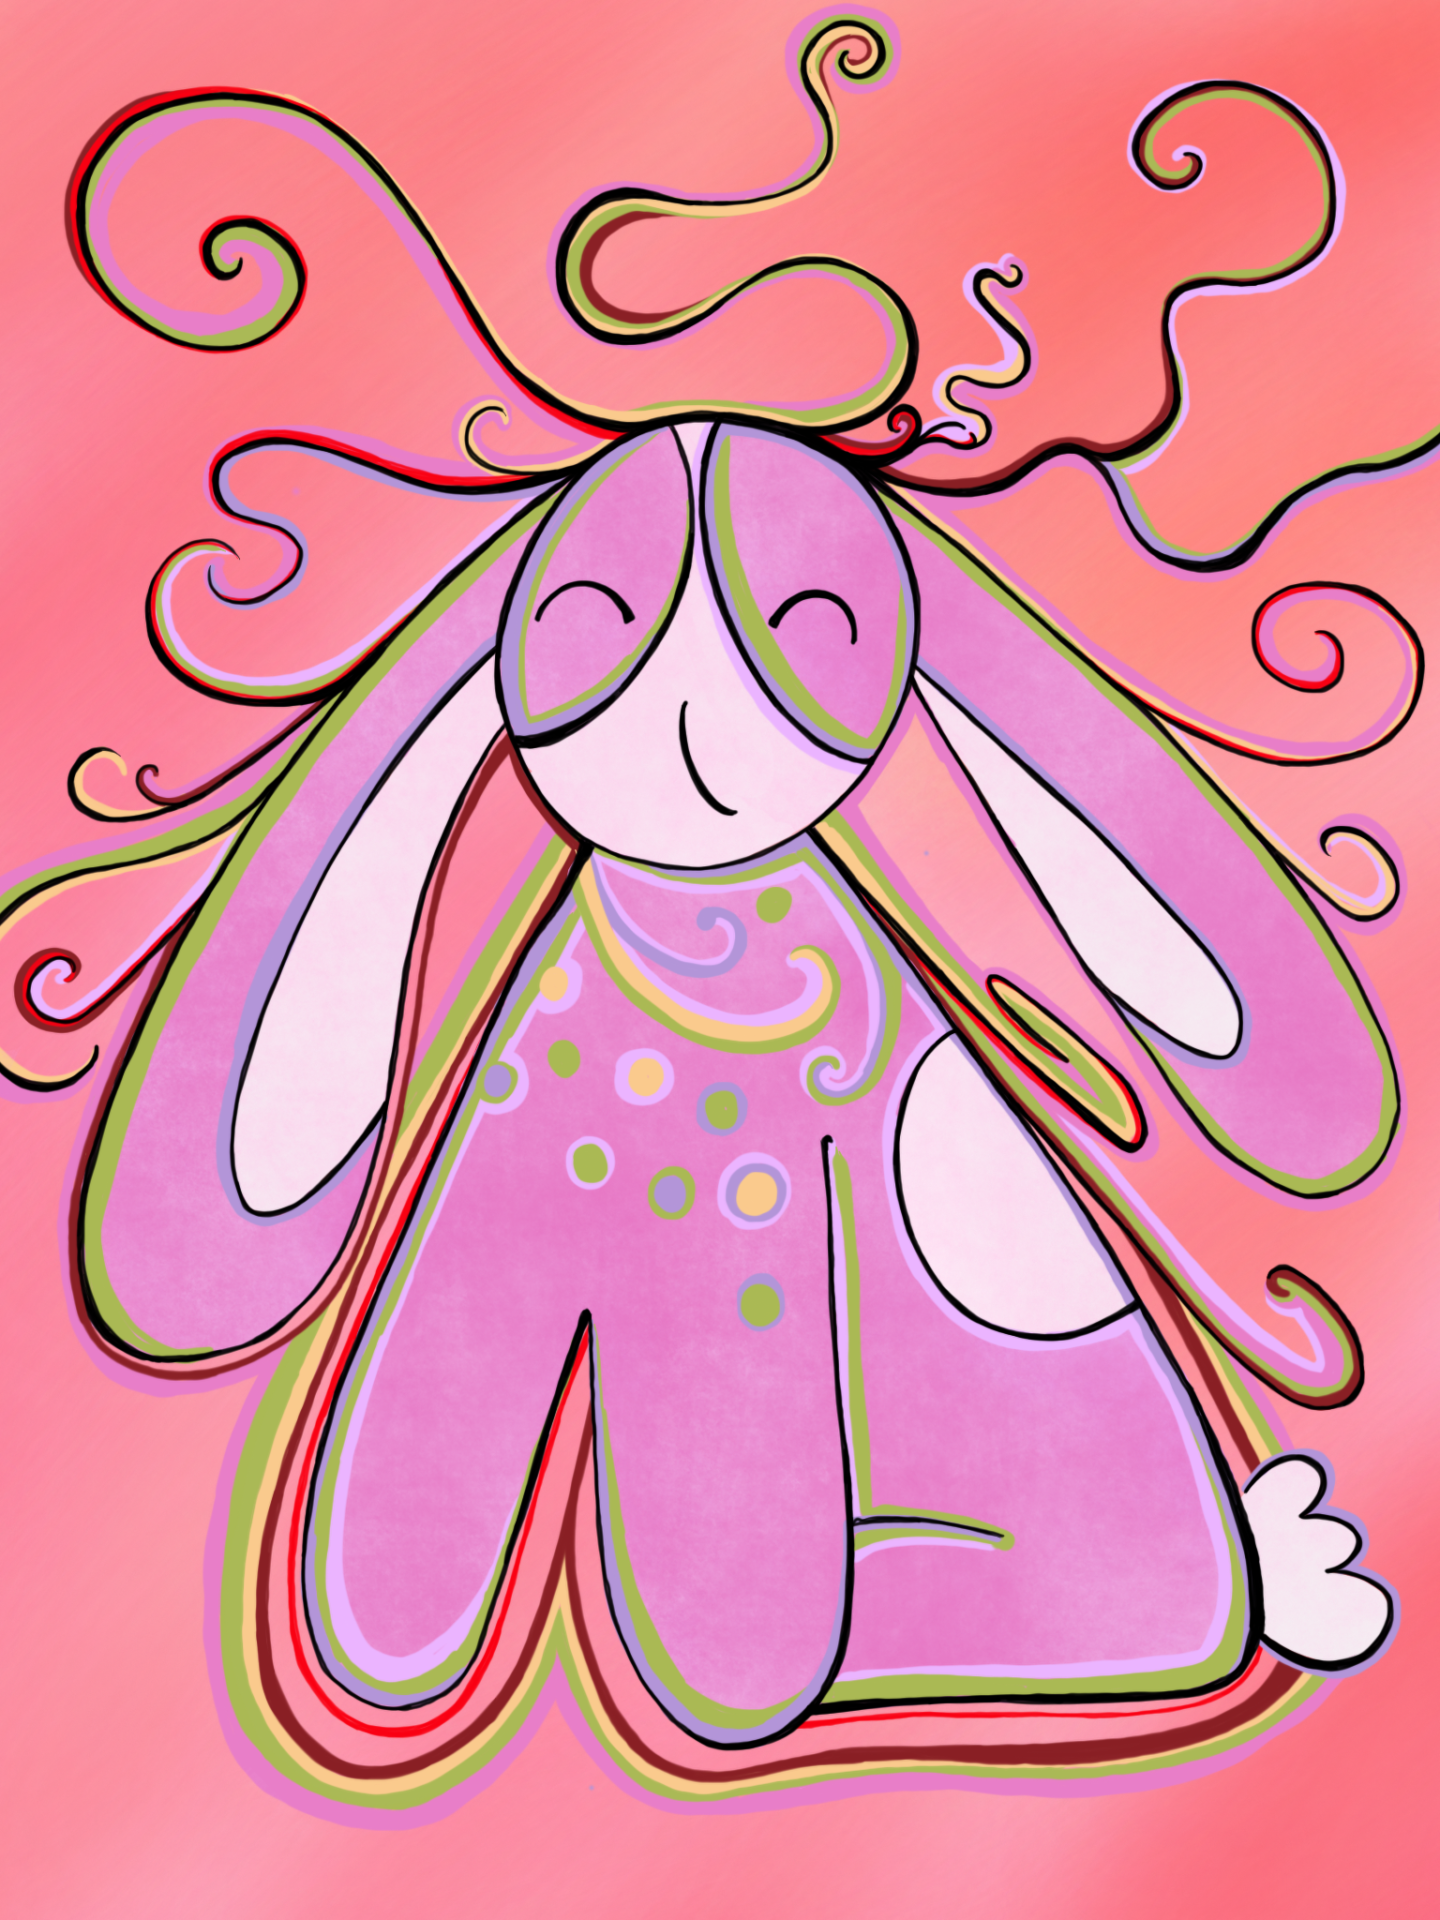 Pink bunny with tendrils of dreams and possibilities coming out of his head